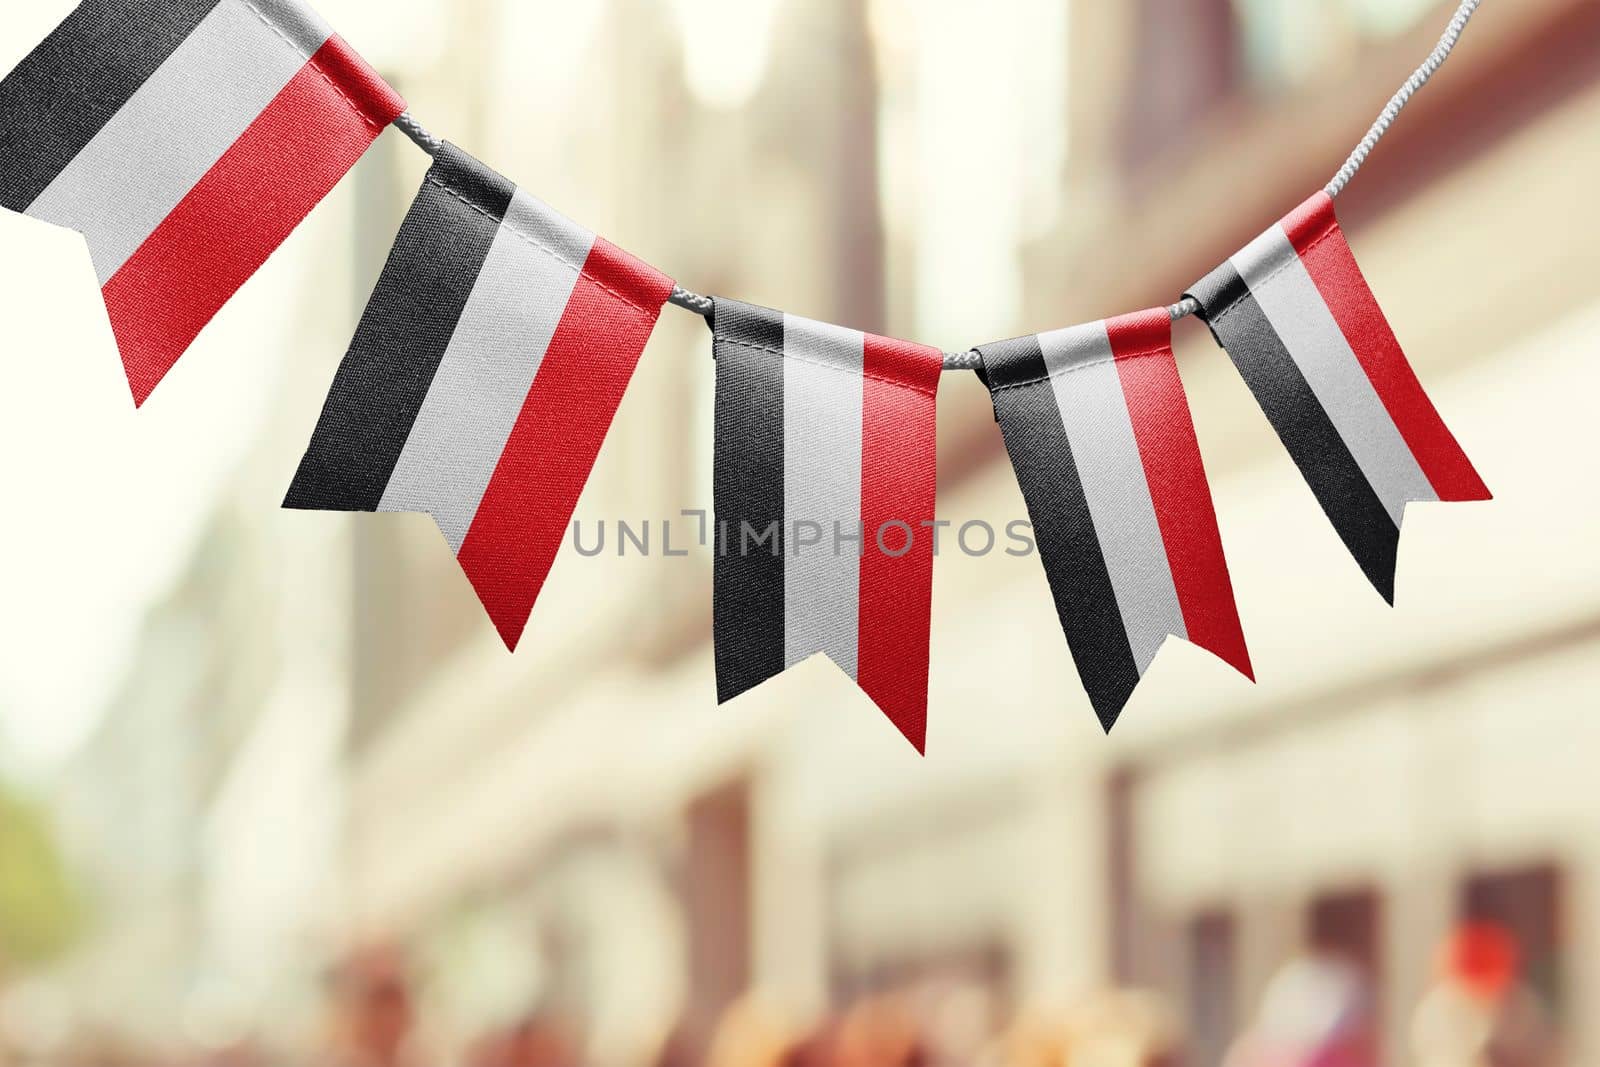 A garland of Yemen national flags on an abstract blurred background.